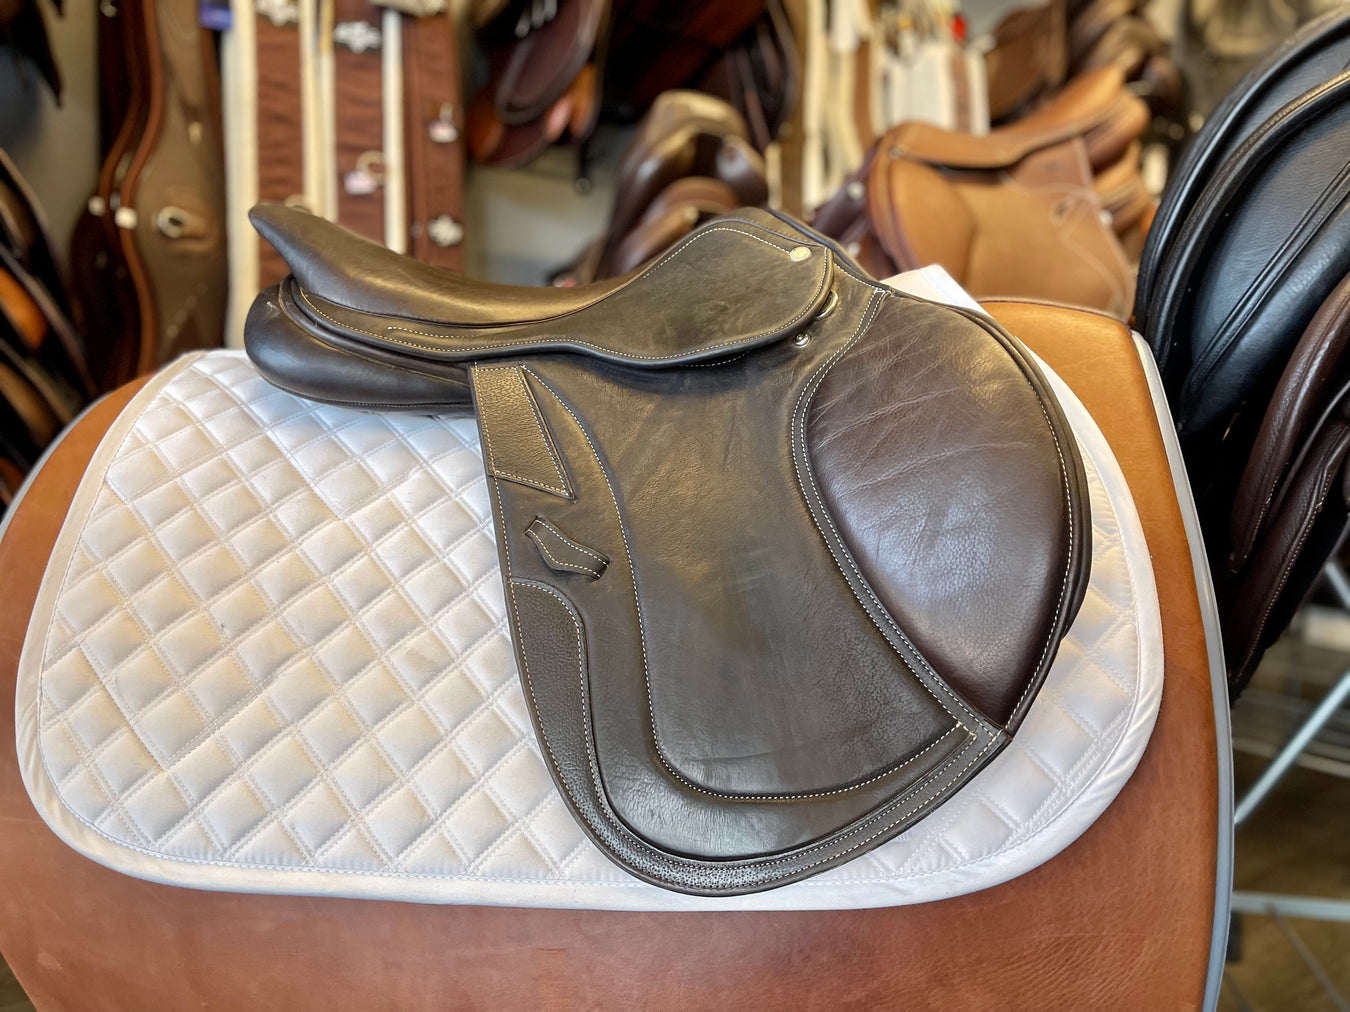 Consignment/Used Saddles